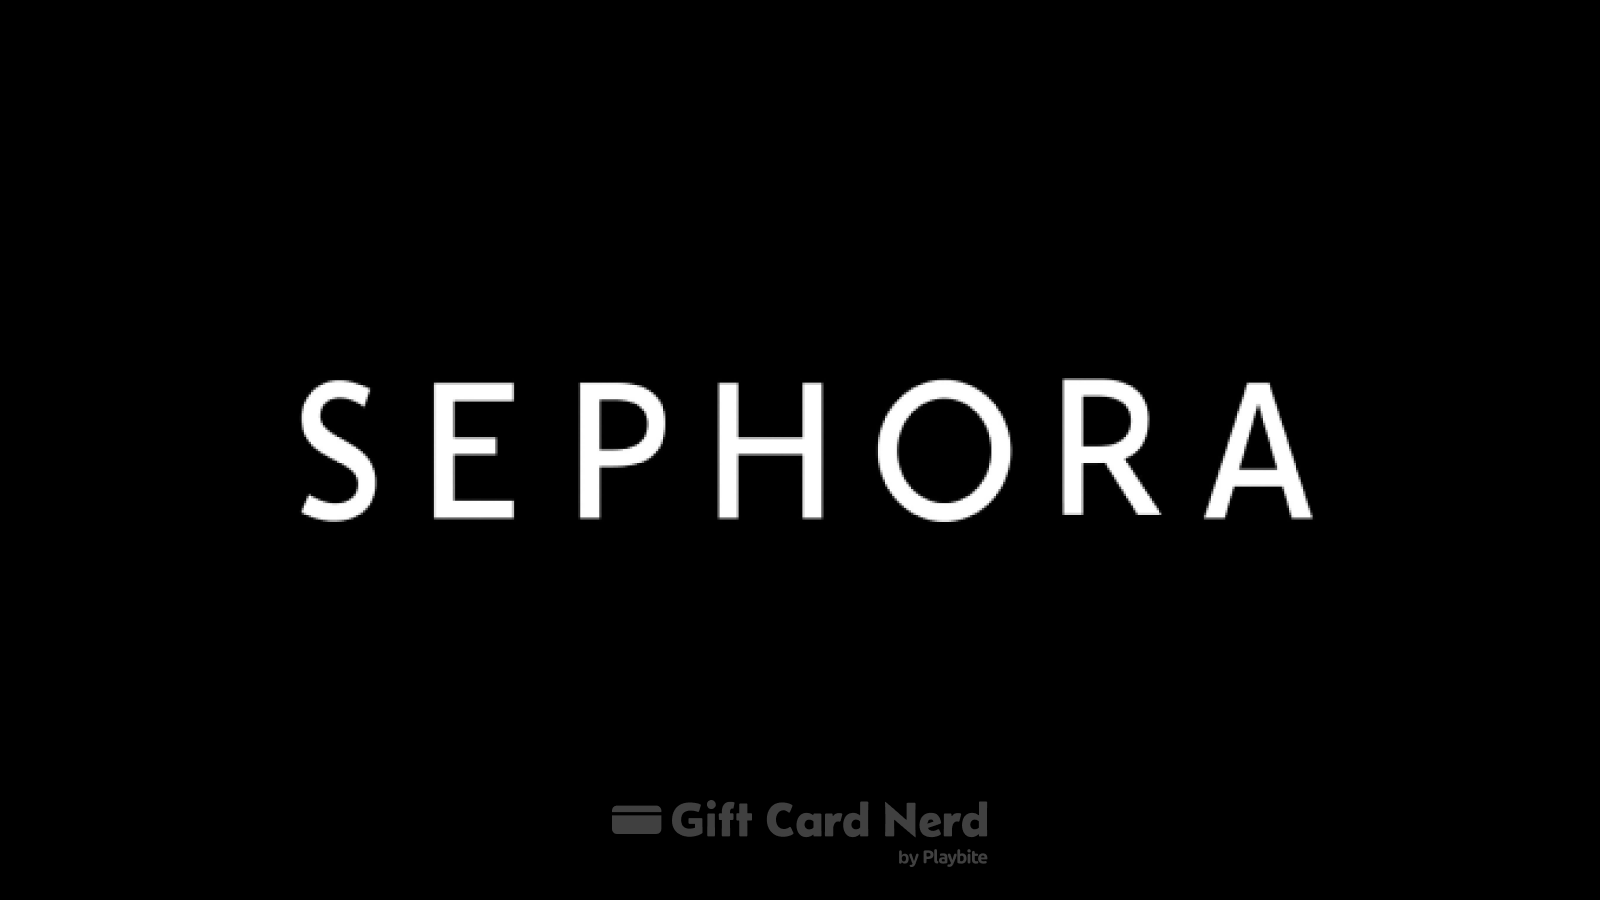 Does Target Sell Sephora Gift Cards?